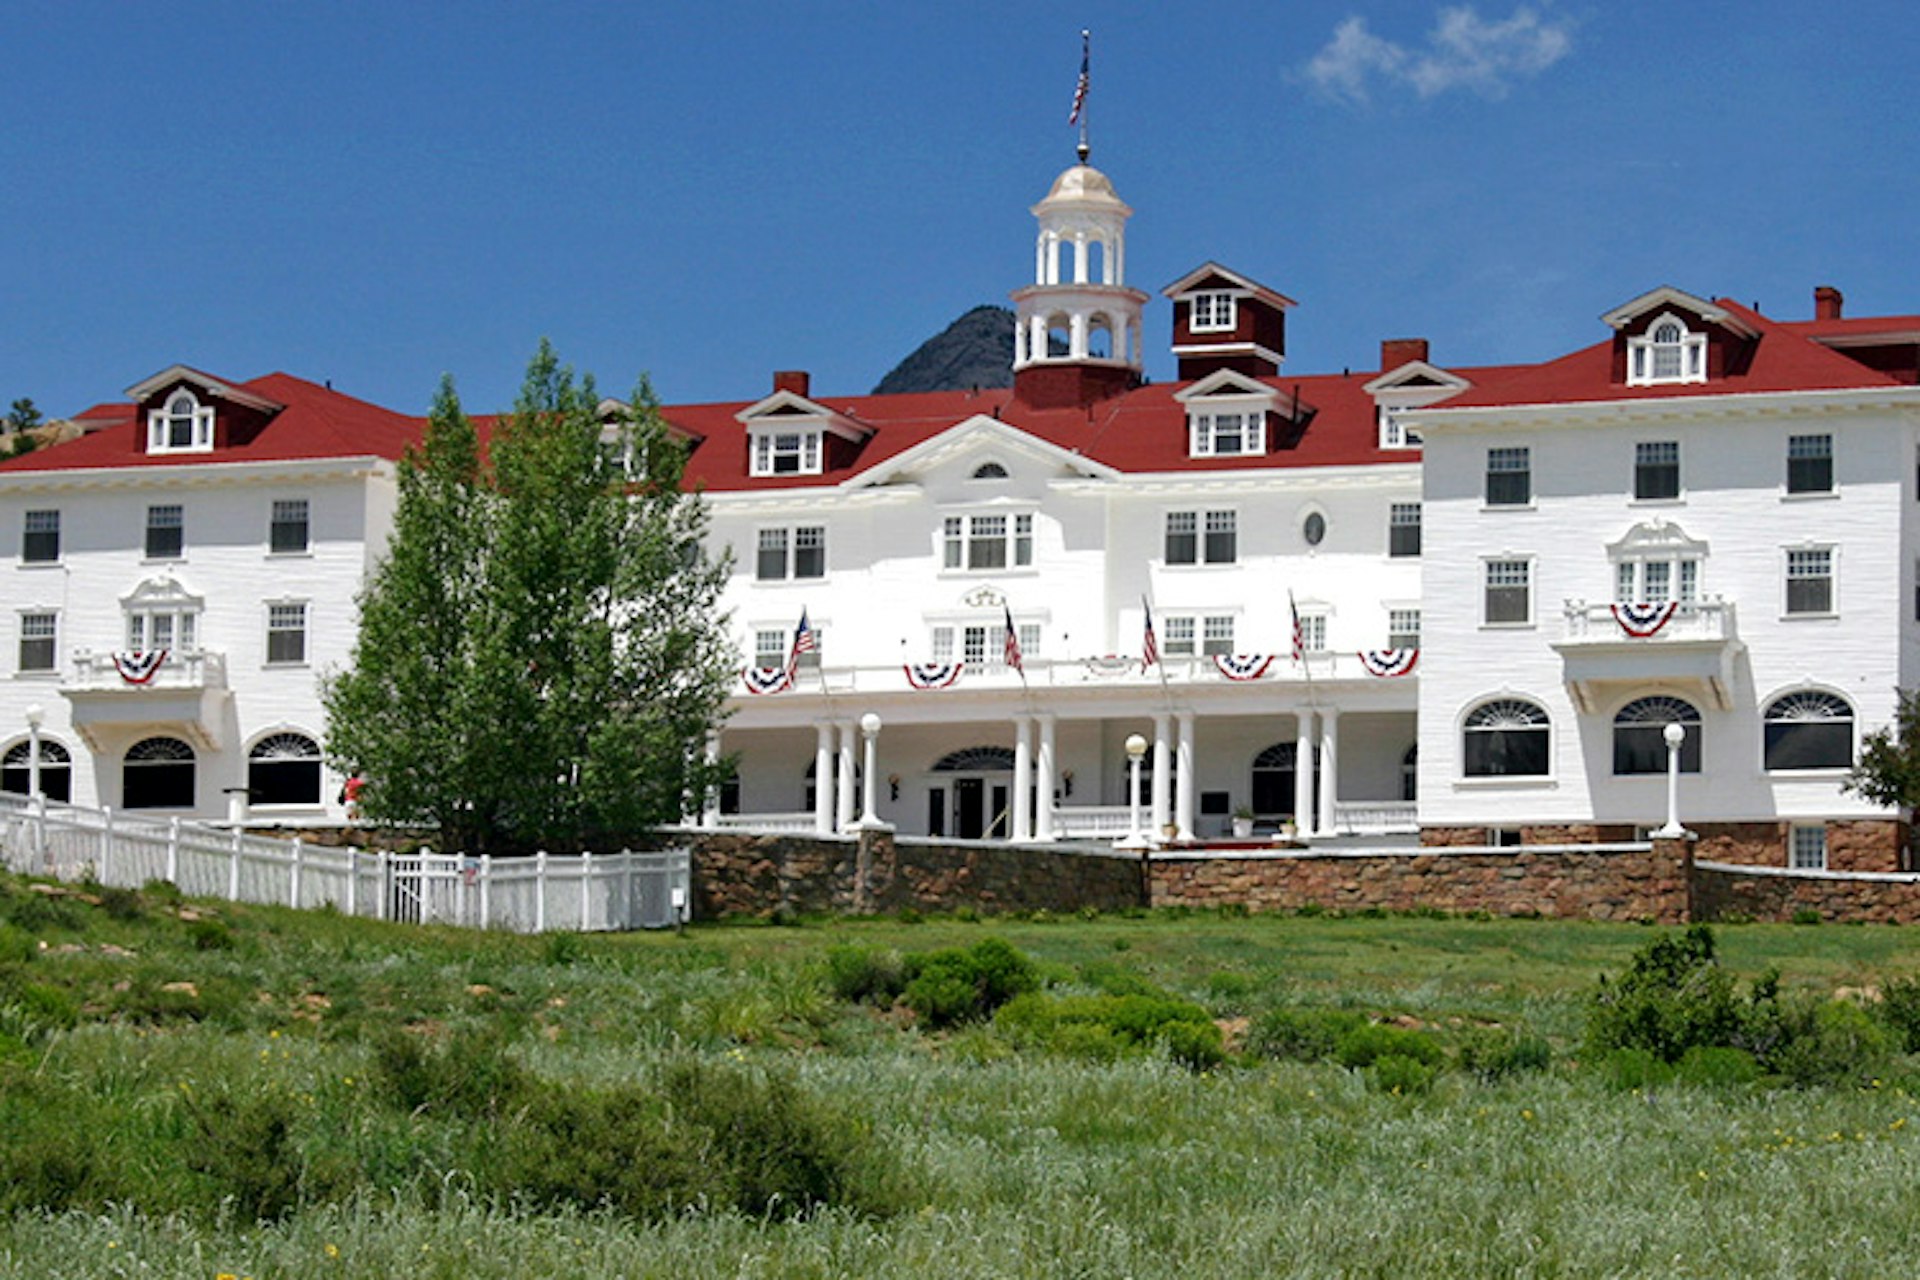 The Stanley Hotel may not look eerie, but the hotel staff say it's haunted. Image by Frank Kovalchek / CC BY 2.0